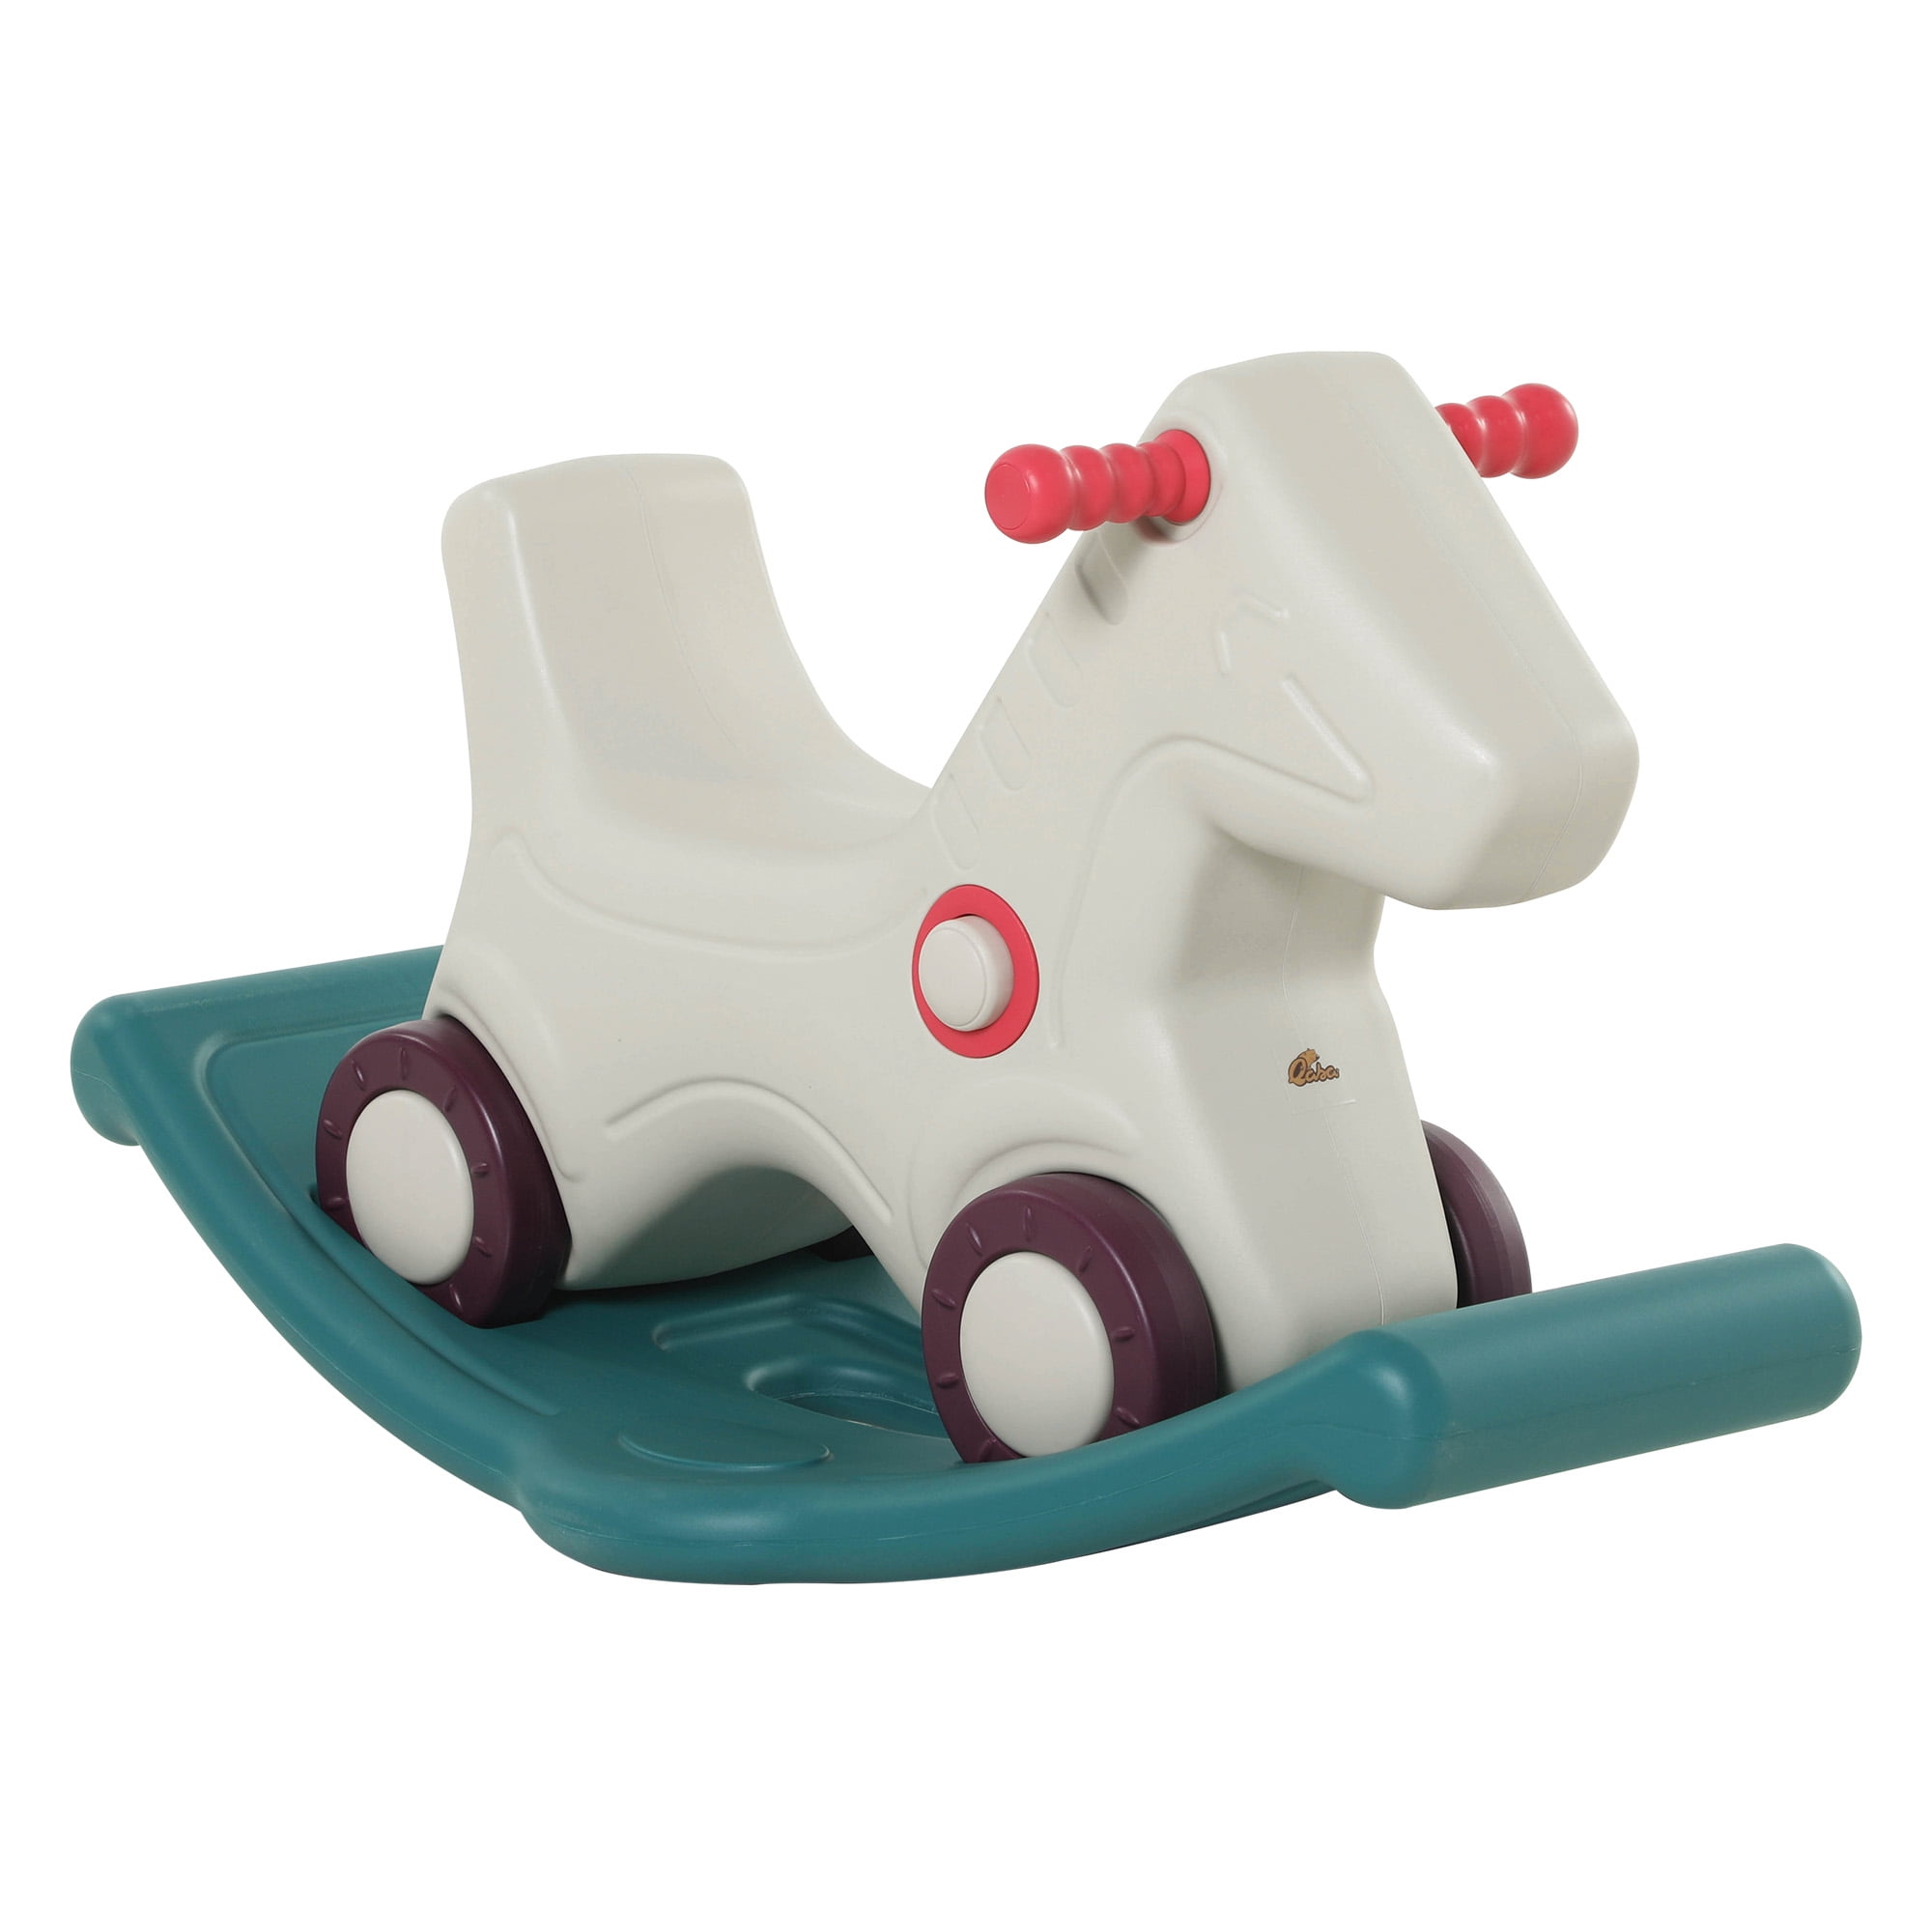 2 in 1 Rolling Kids Gift Spring Rocking Horse Kids Ride On Pony Toy w/Wheels US 